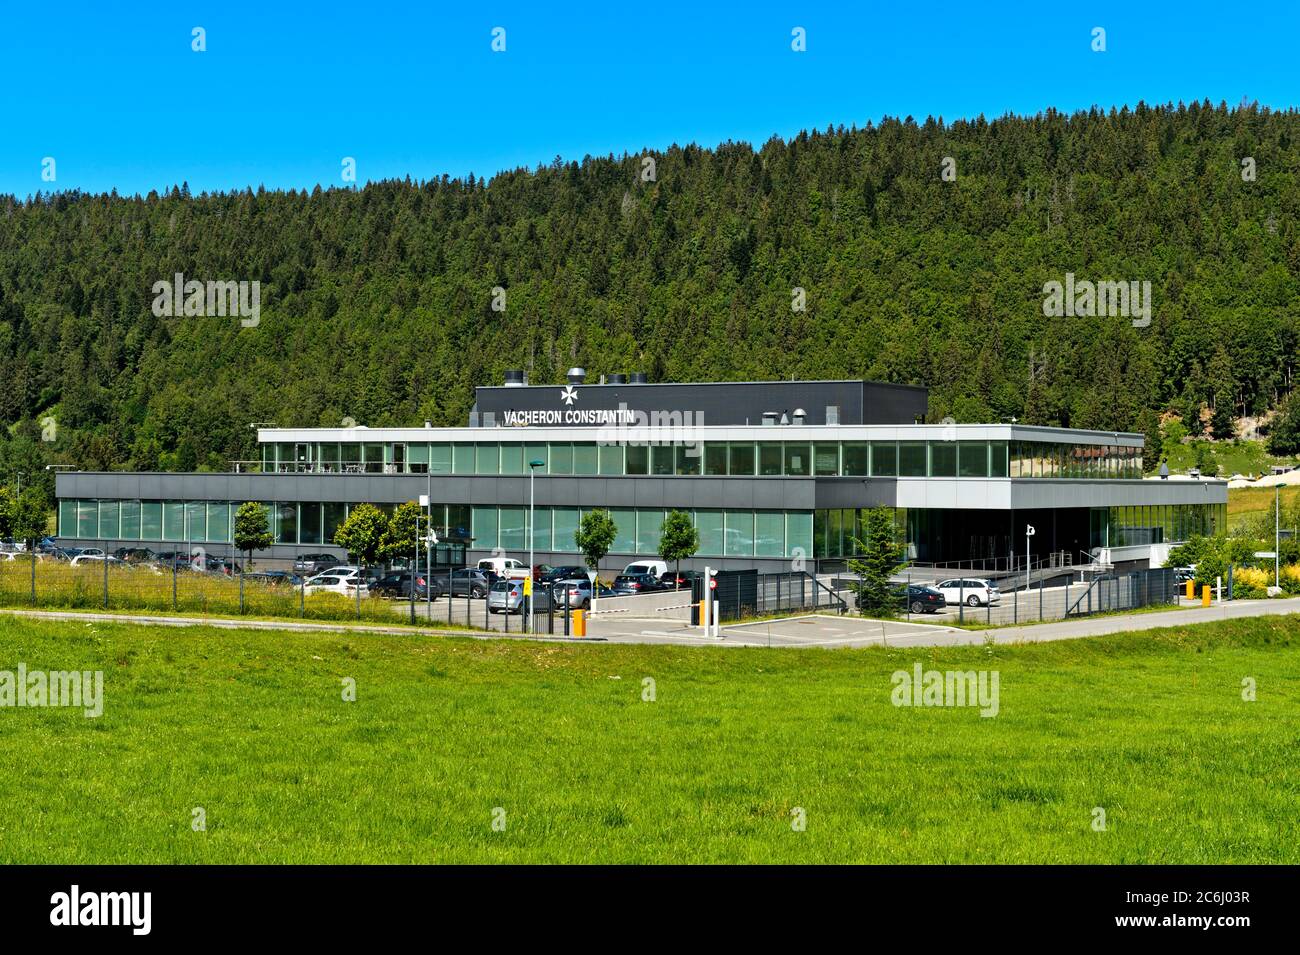 Manufacturing centre for watch components of the watch and clock manufacturer Vacheron Constantin, Le Brassus, Vallee de Joux, Vaud, Switzerland Stock Photo